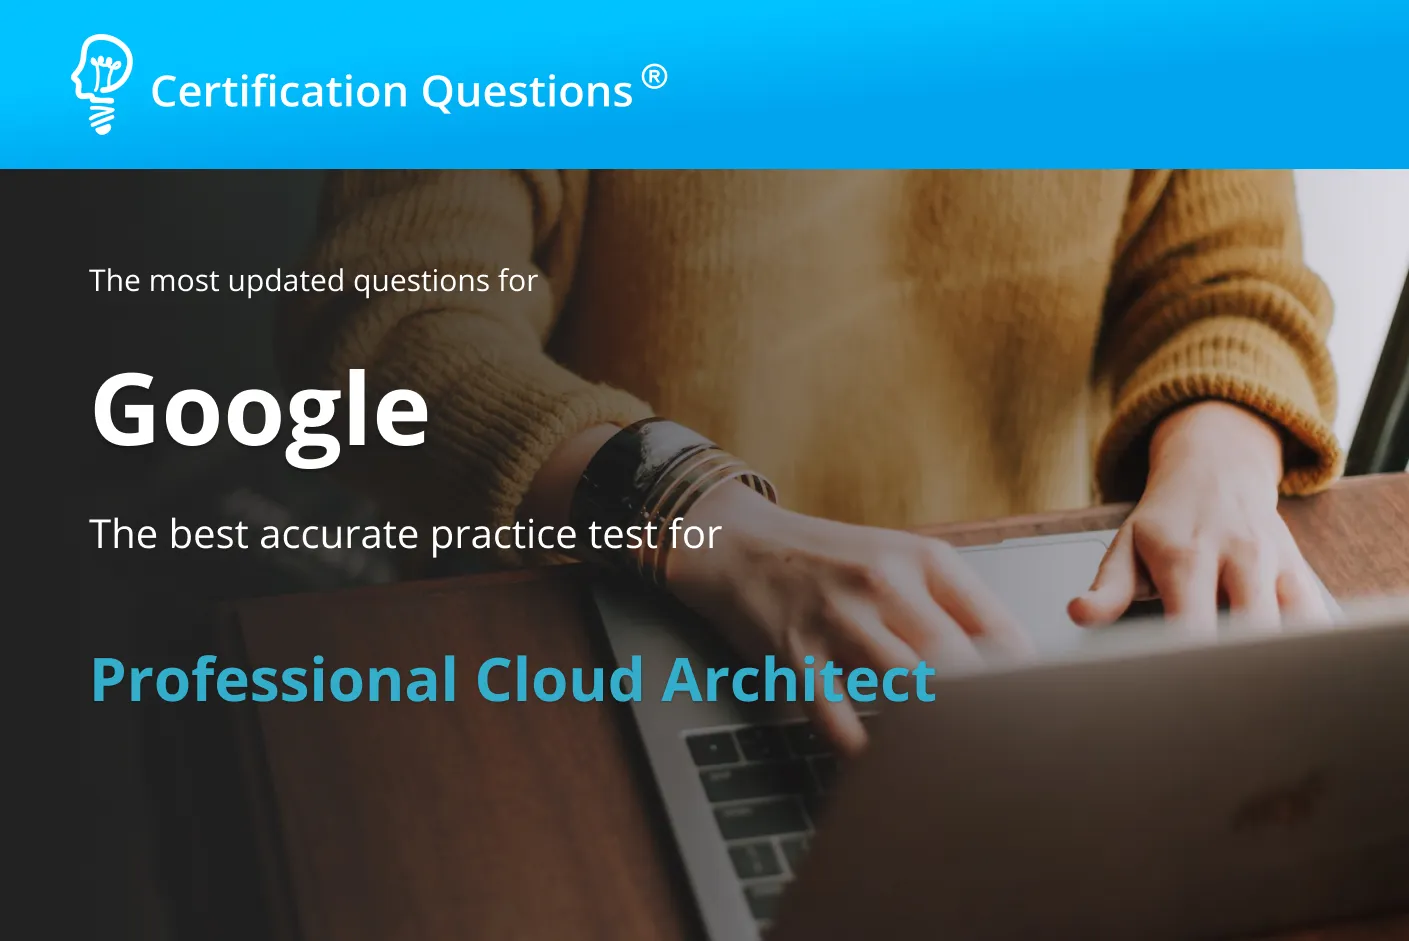 This image is related to Google Cloud Professional Cloud Architect practice test